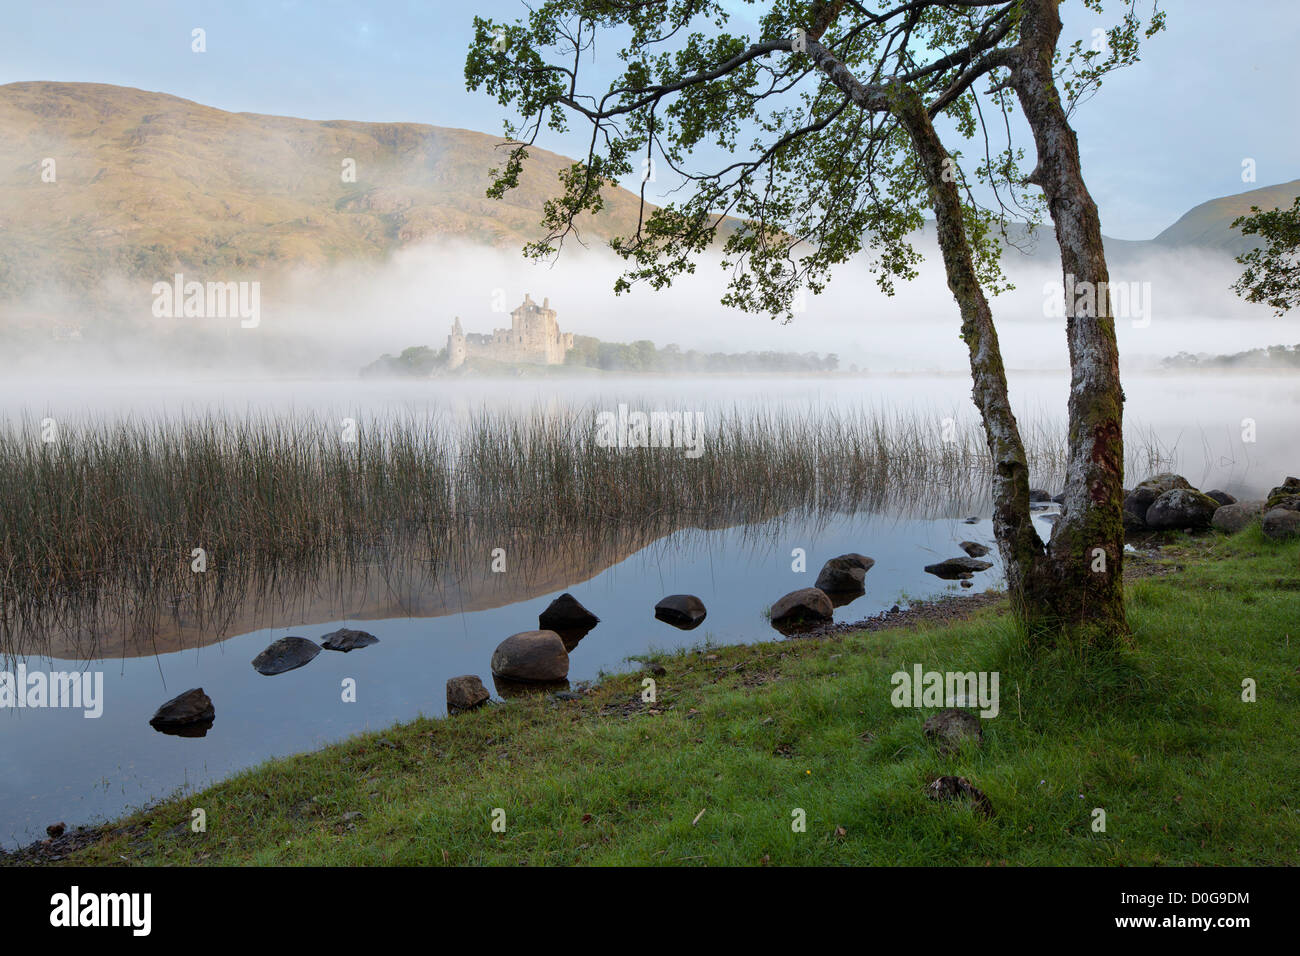 Mist shrouded Kilchurn Castle viewed from the banks of Loch Awe, Argyll and Bute, The Highlands, Scotland, UK Stock Photo